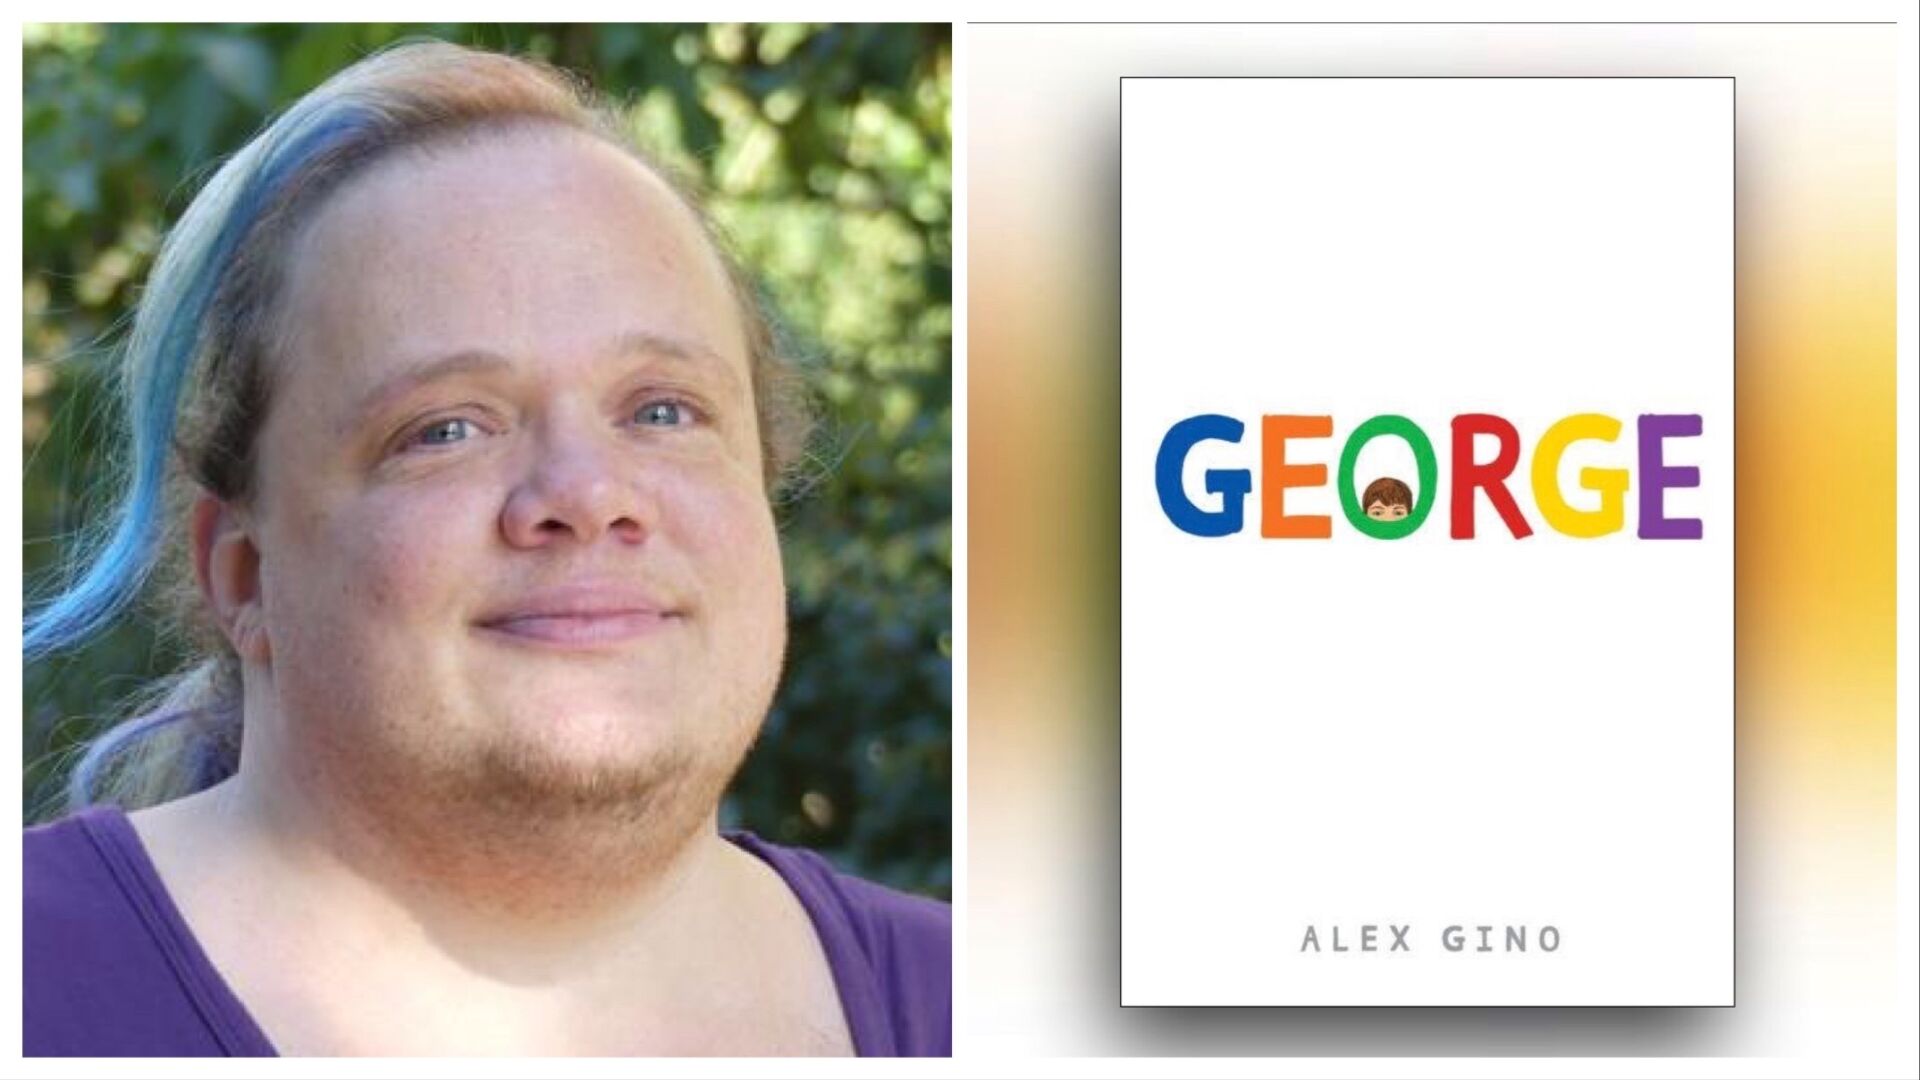 George” Author Weighs in on Push to Remove Book From Moore County Schools News thepilot photo